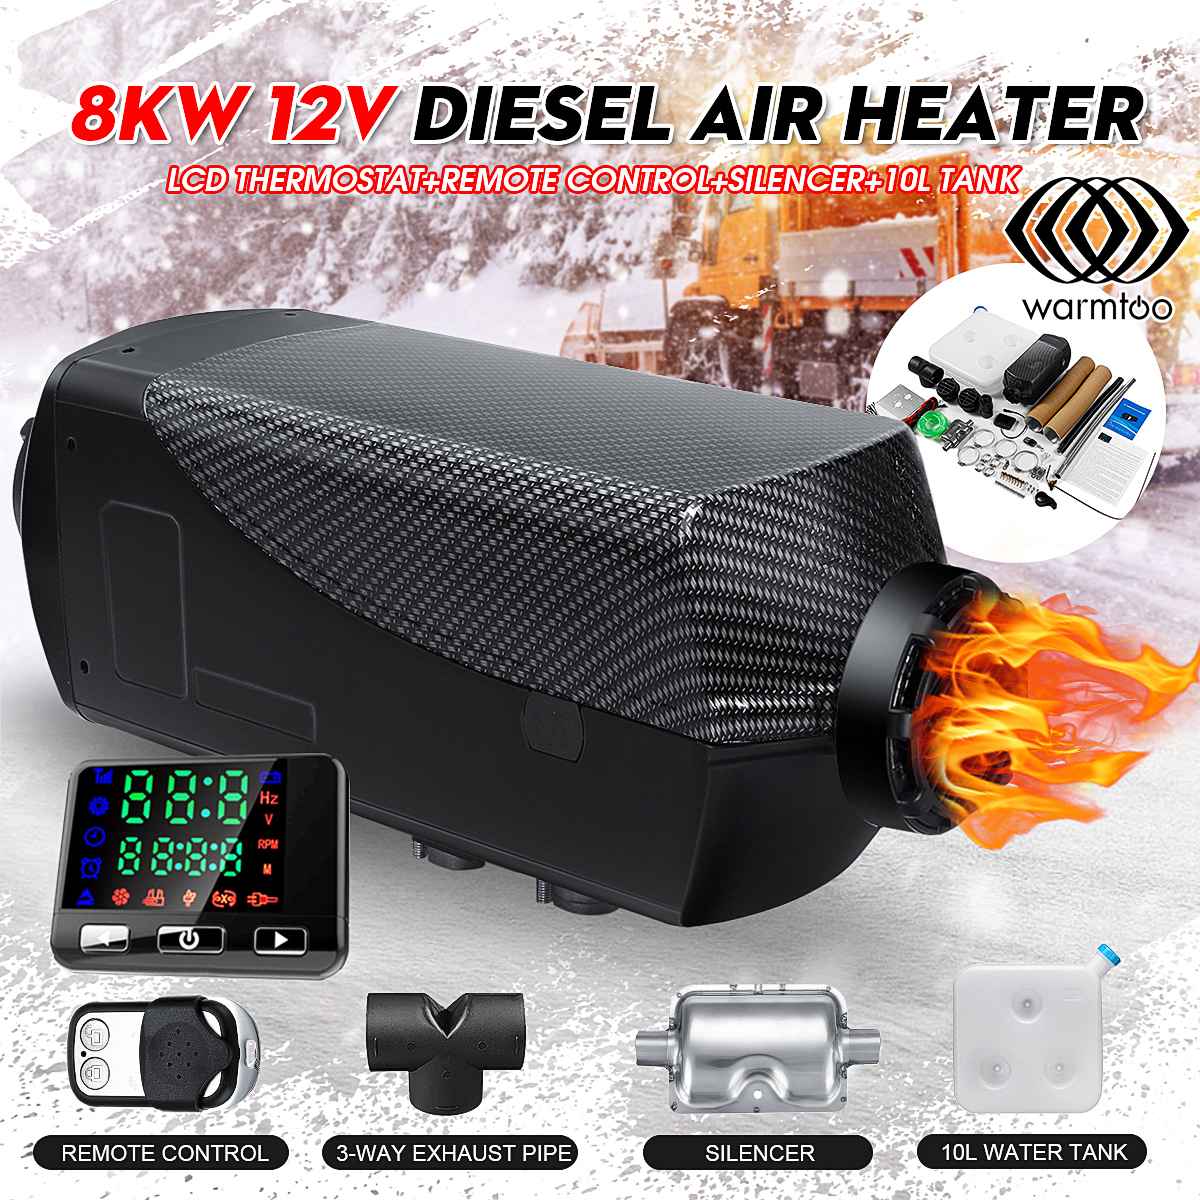 Car Heater 8KW 12V Air Diesels Heater Parking Heater With Remote Control LCD Monitor for RV, Motorhome Trailer, Trucks, Boats